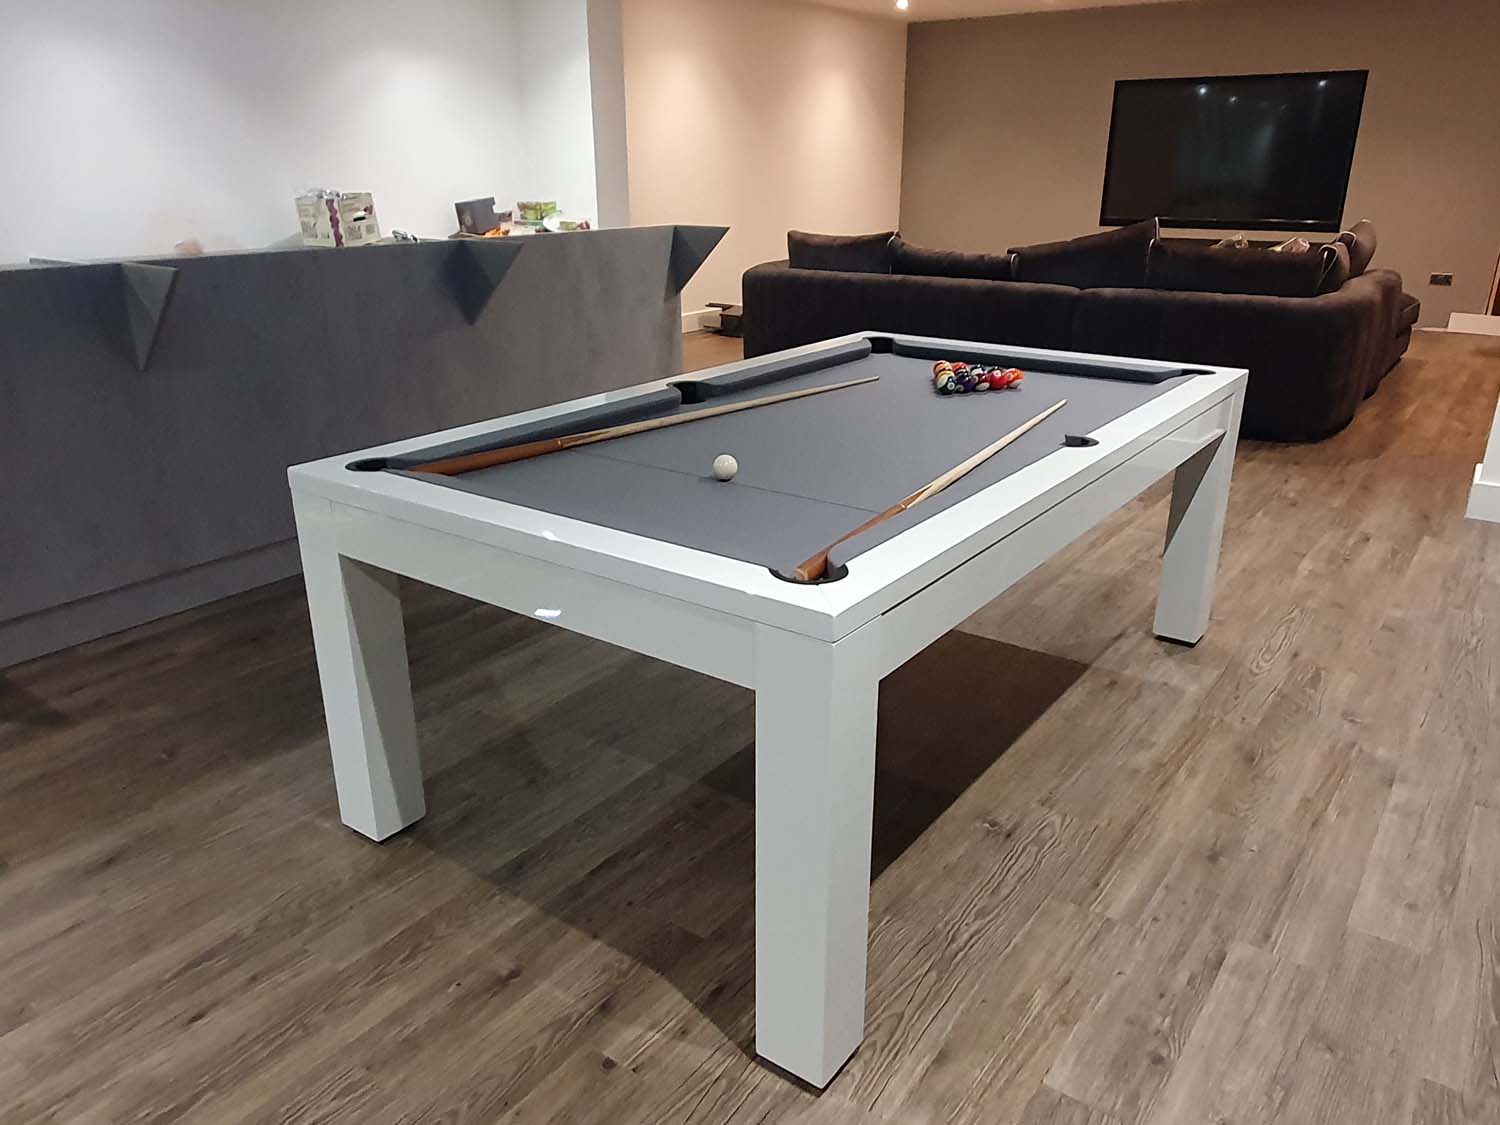 Signature Hawkes Pool Dining Table - High Gloss White: 7ft | Free ...